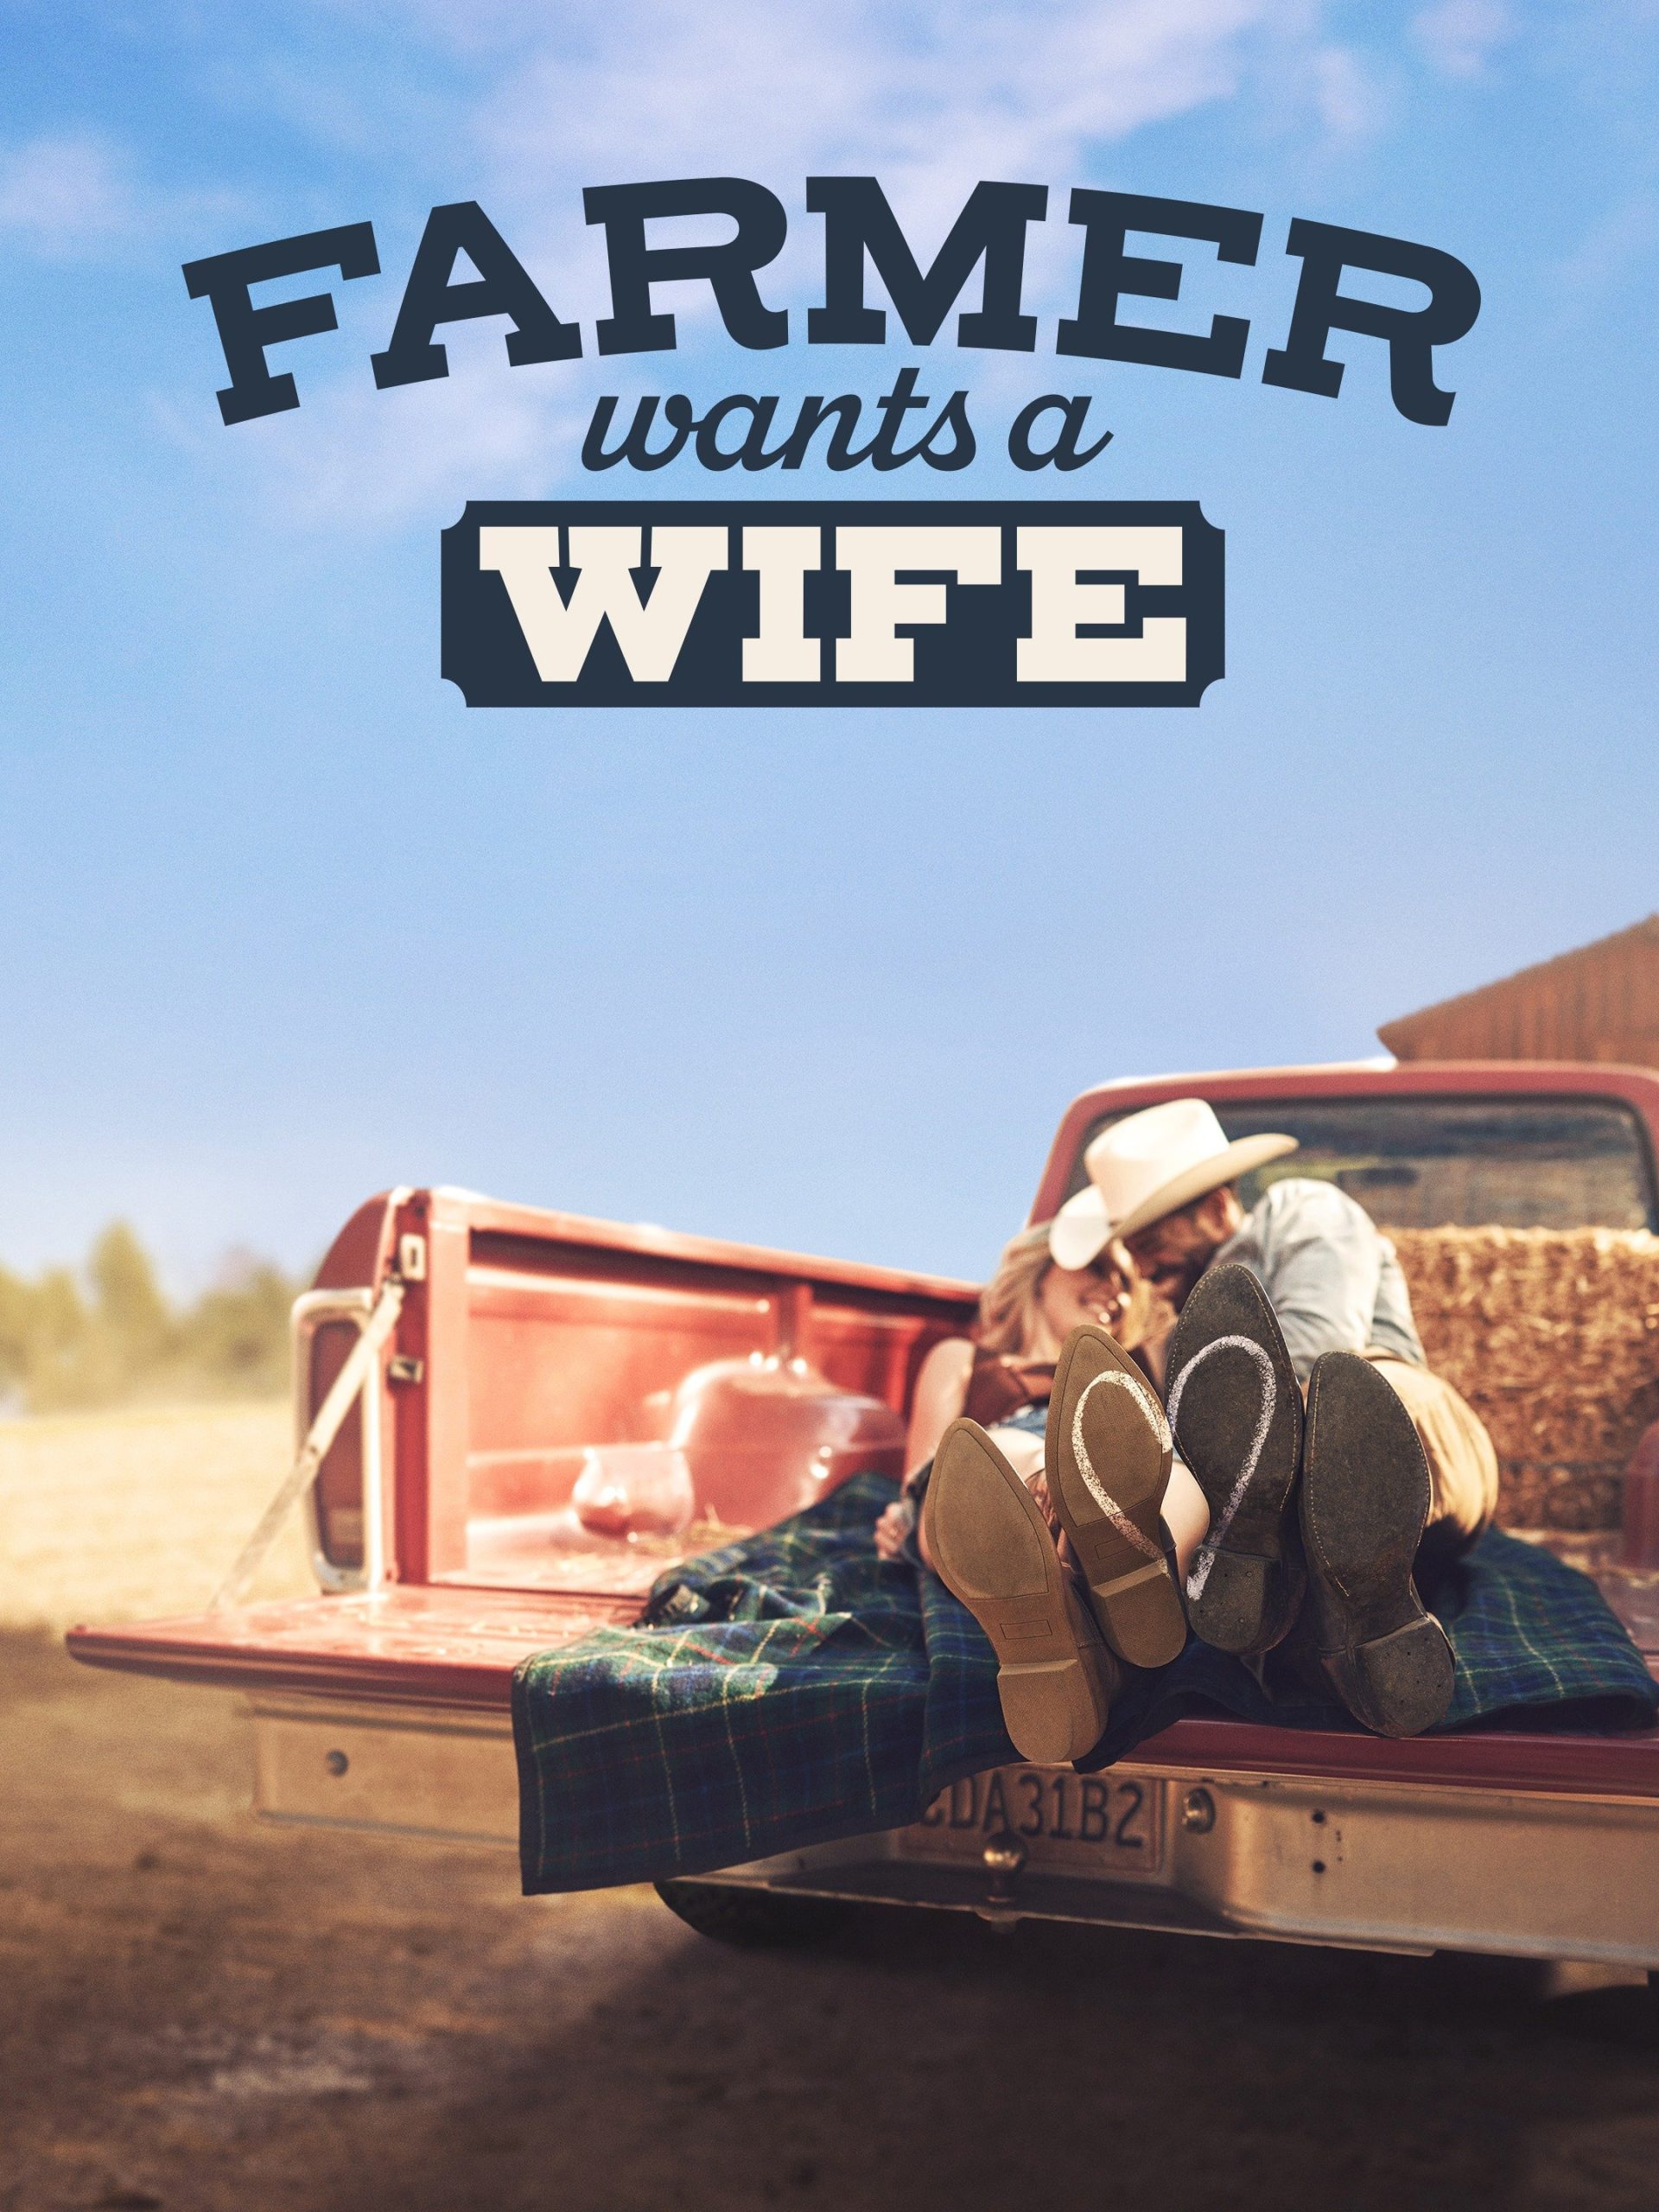 Farmer Wants a Wife Season 2 Episode 4 "You Need to Step up Your